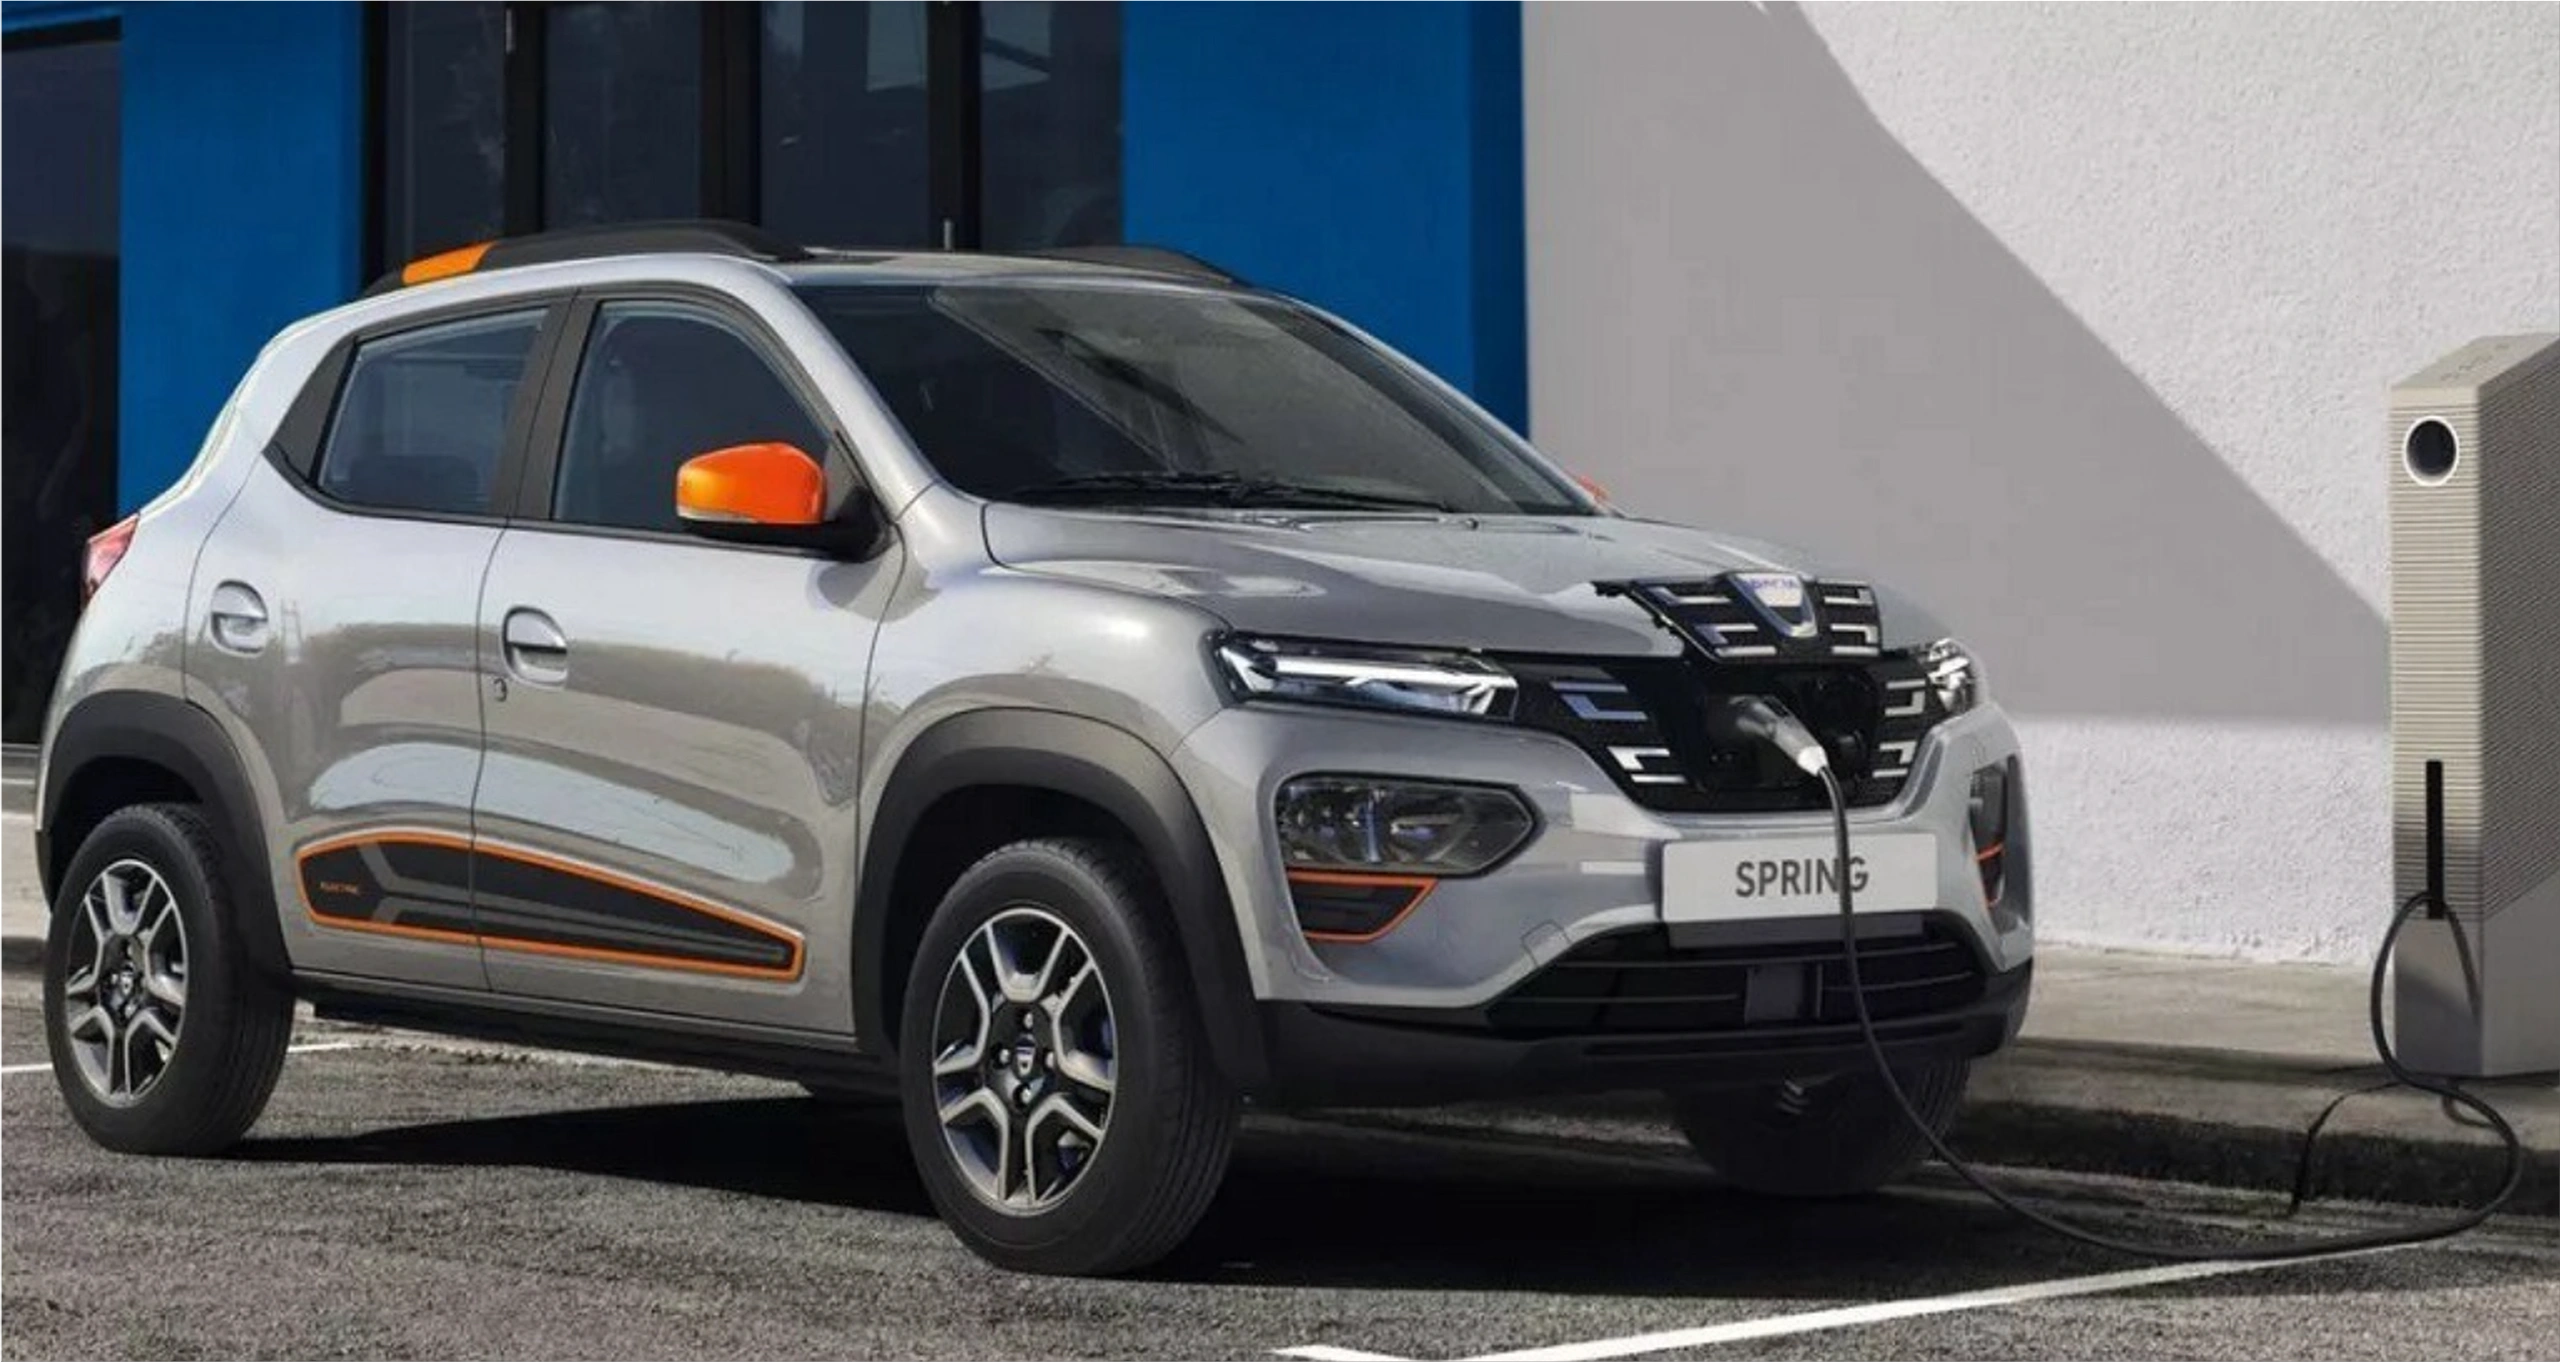 Renault Makes EV Rentals Easy With New Dacia Spring Electric